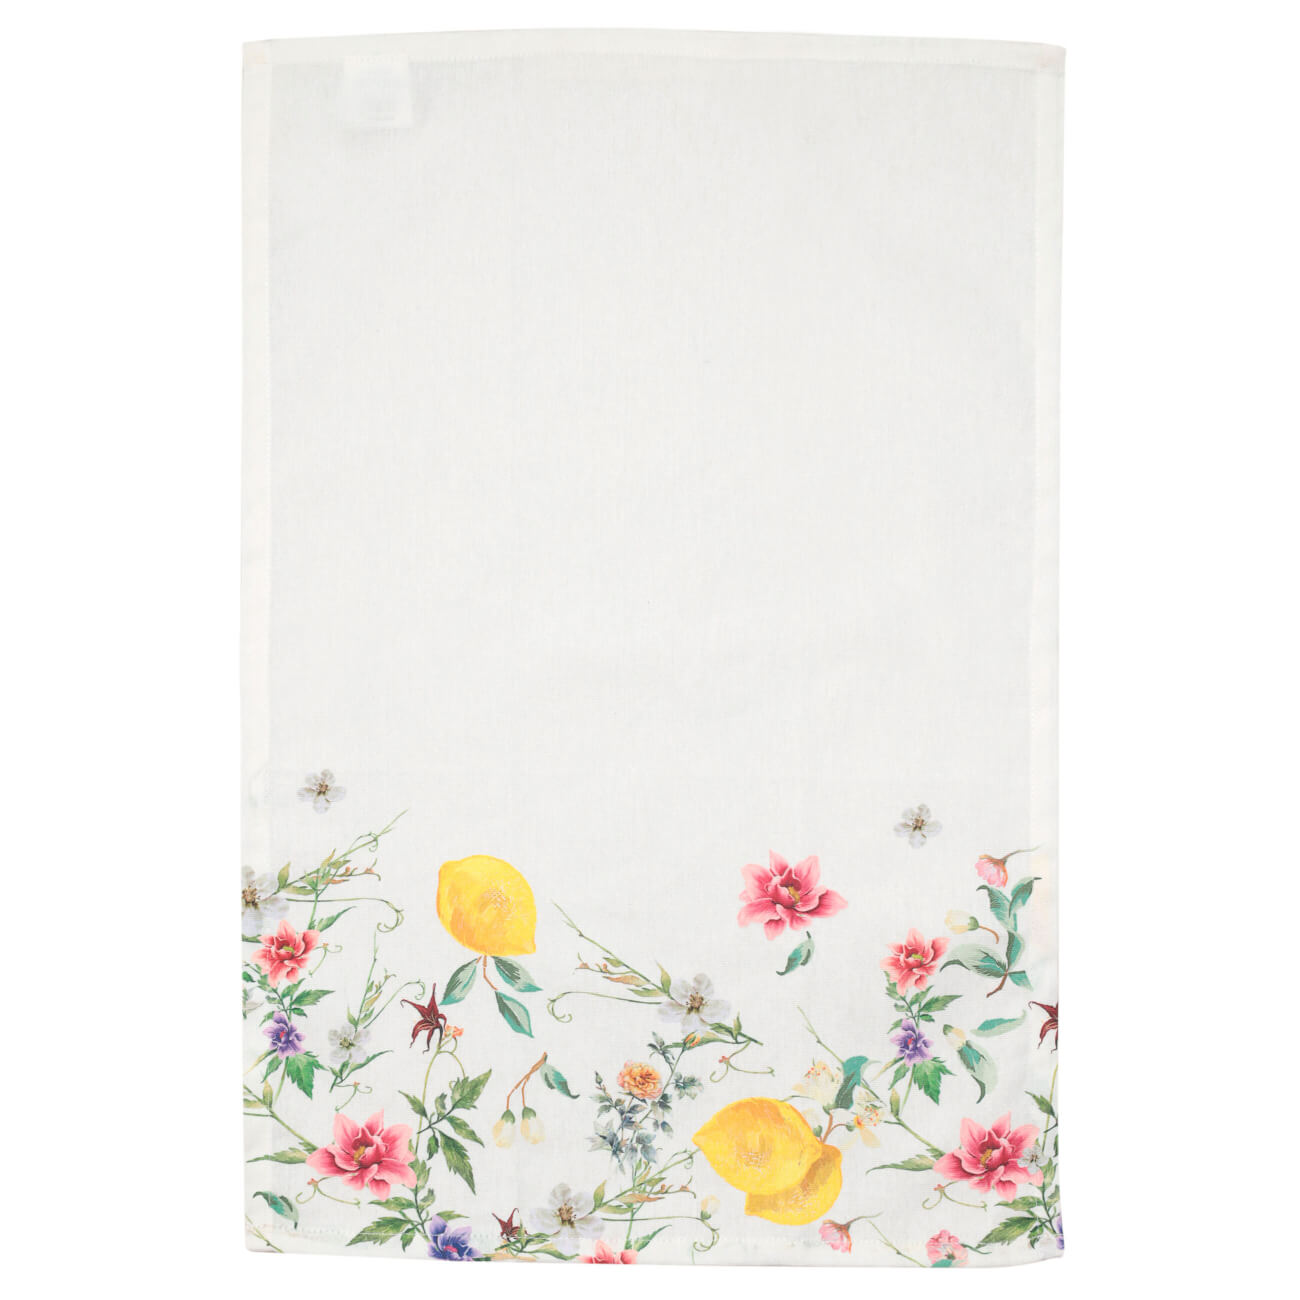 Kitchen towel, 40x60 cm, cotton, white, Flowers and lemons, Sicily in bloom изображение № 1